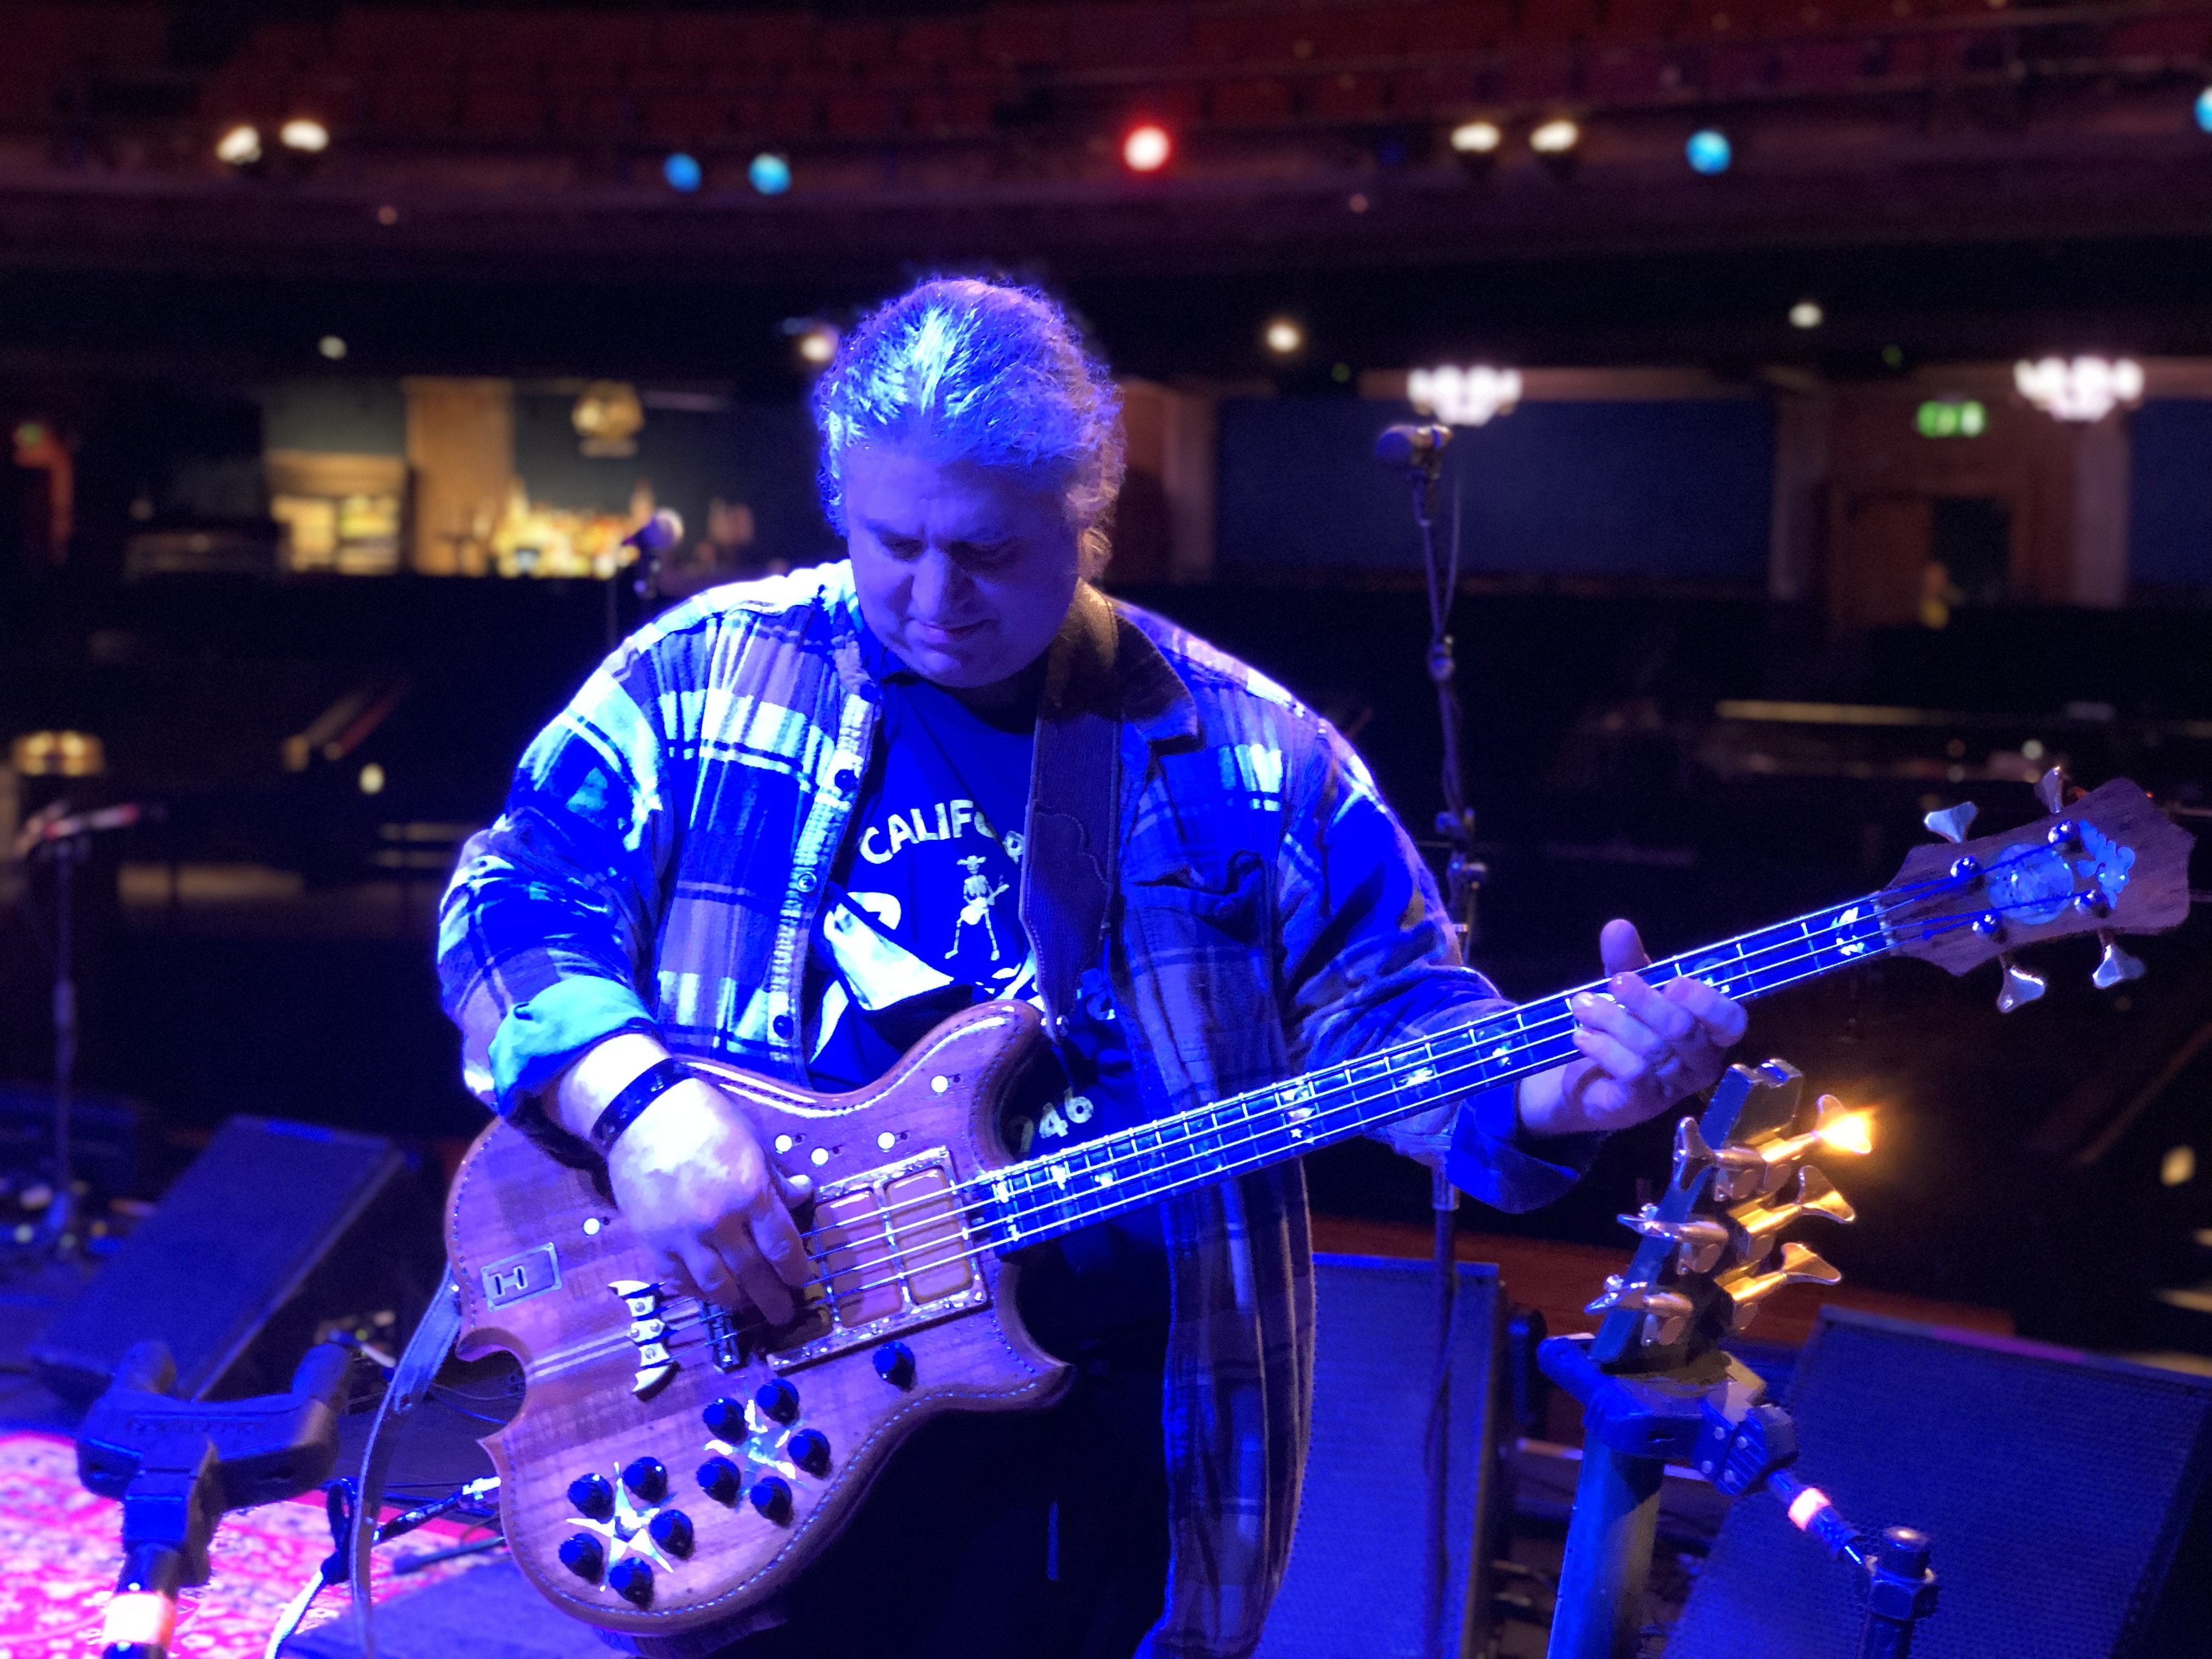 Grateful Guitars Foundation and Scarlet Fire Guitars are pleased to announce the exclusive selection of Leo Elliott to reproduce Phil Lesh’s “Mission Control” Bass